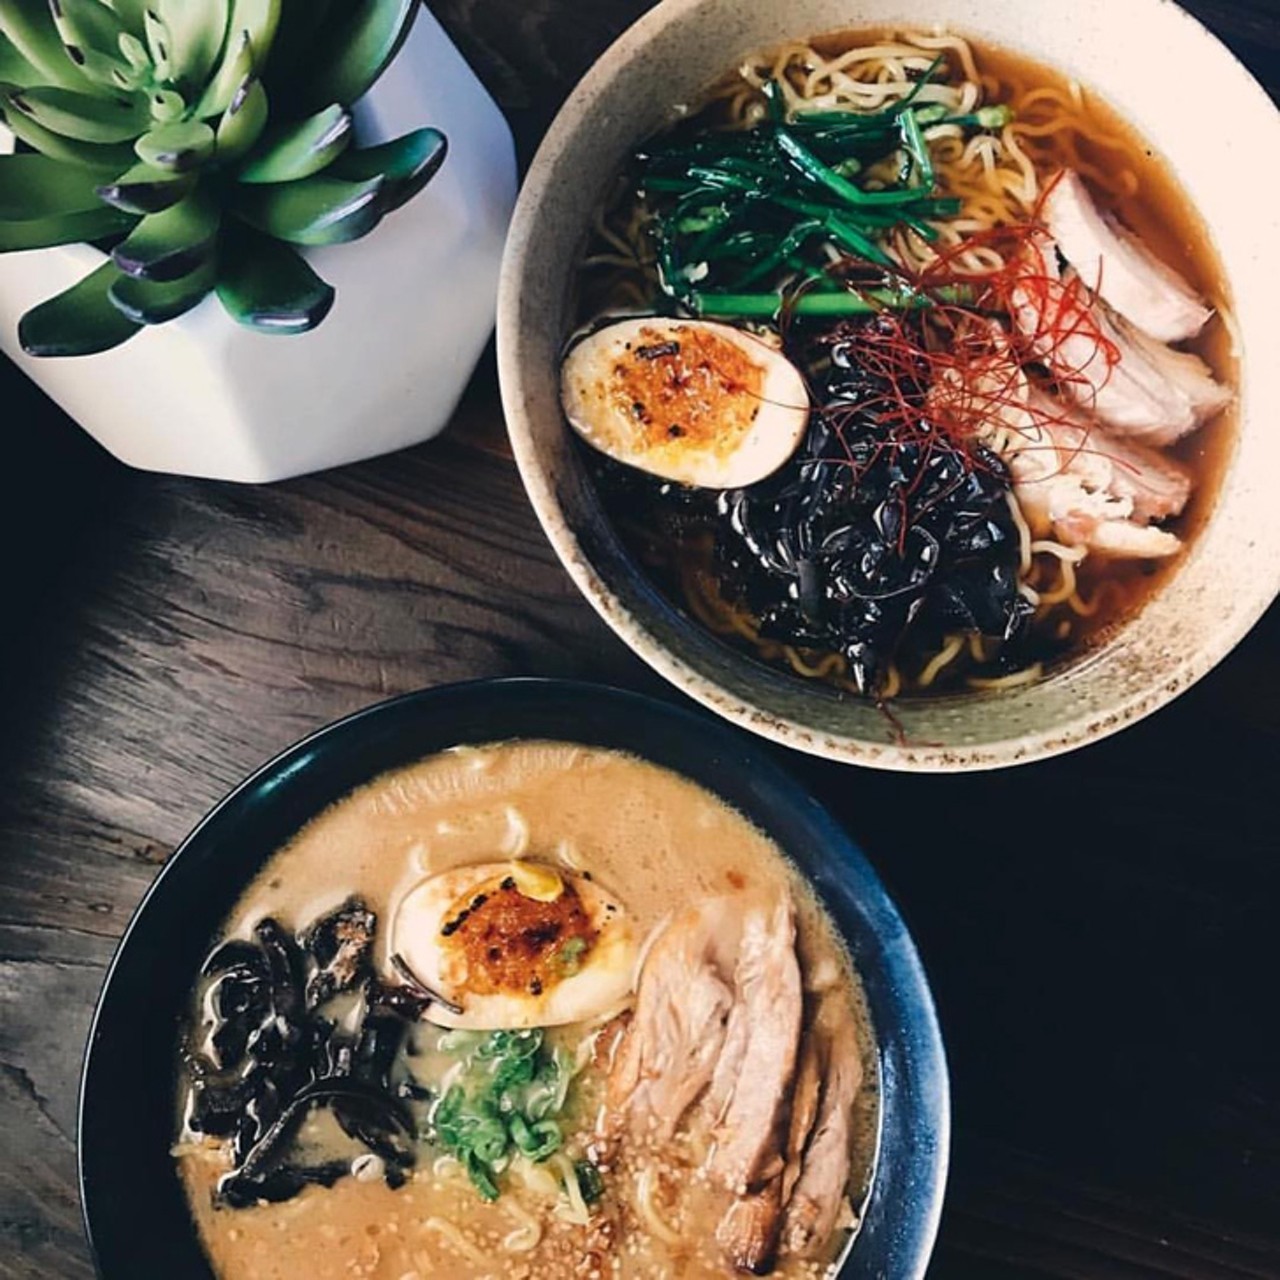 Notable 2019 opening: Domu Dr Phillips  
7600 Dr Phillips Blvd., 407-630-6163
First and foremost, know that Domu makes their own noodles, and there&#146;s no takeout, &#147;to maintain the integrity and quality of the food.&#148; Domu originally started in November of 2016 in the Audubon Park District of Orlando. Created by chef-owner Sean "Sonny" Nguyen, his vision was brought to life with a neighborhood restaurant and bar that offered house-made noodles, creative takes on small plates and seasonal cocktails. Domu is a slang term for "a dream come true" and the ambiance supports that ideology of going against the grain and creating something unique. It&#146;s an opportunity to witness true Japanese techniques performed by a modern-day chef.
Photo via Domu/Facebook